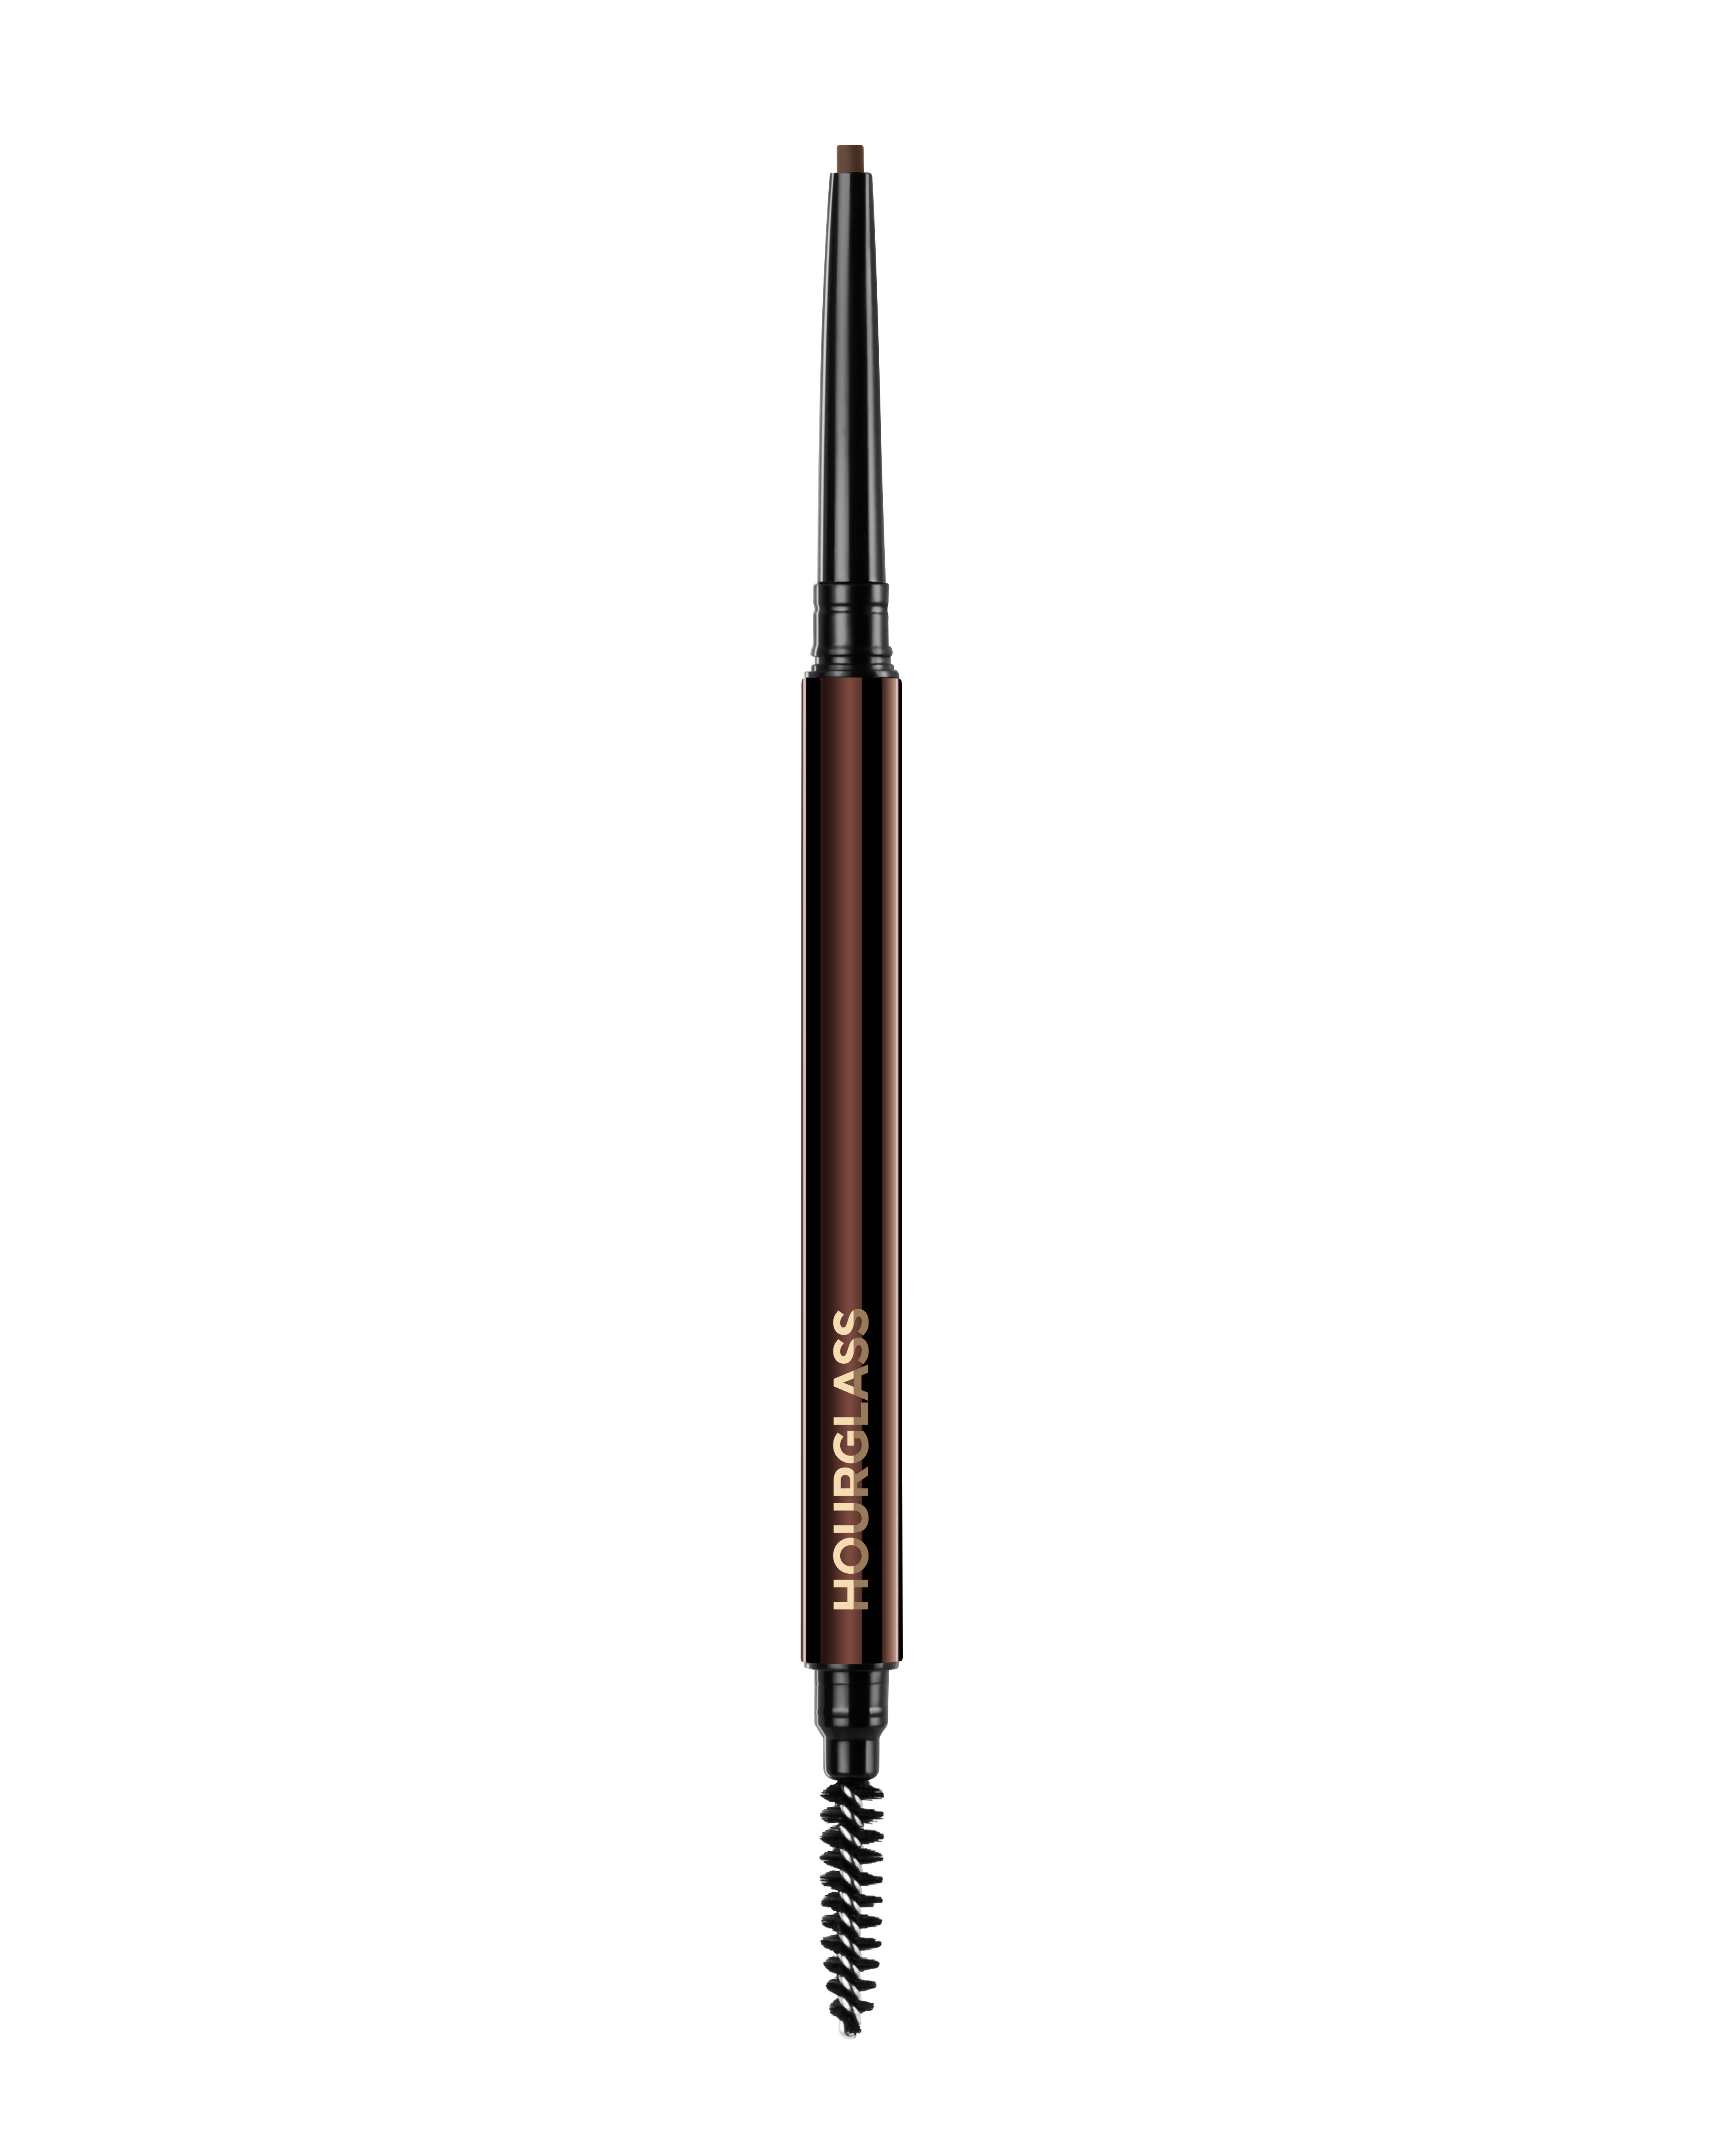 Hourglass Arch Brow Micro Sculpting Pencil $250